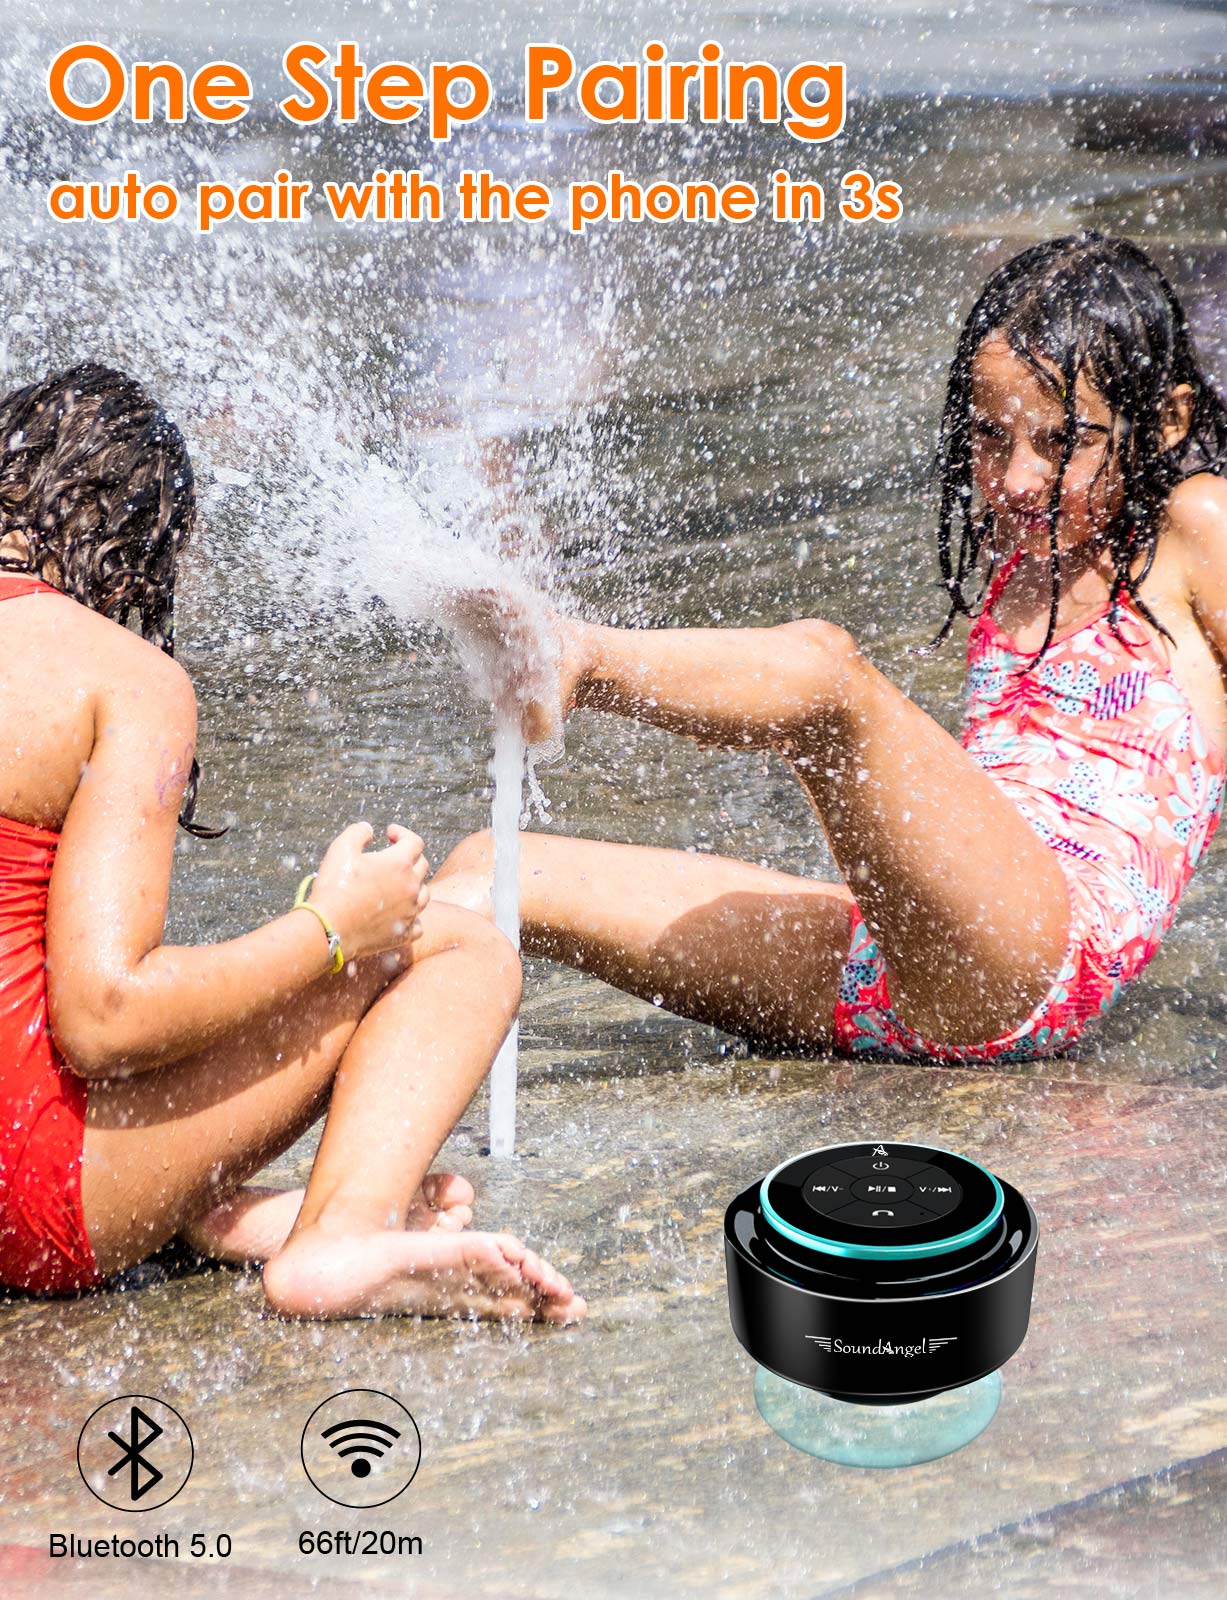 XLeader SoundAngel Mate - Premium 5W Bluetooth Shower Speaker IPX7 Waterproof Speaker with Suction Cup, 3D Crystal Sound & Bass, Perfect Mini Wireless Speakers for iPhone Pool Bathroom Gift-Blue - image 3 of 7